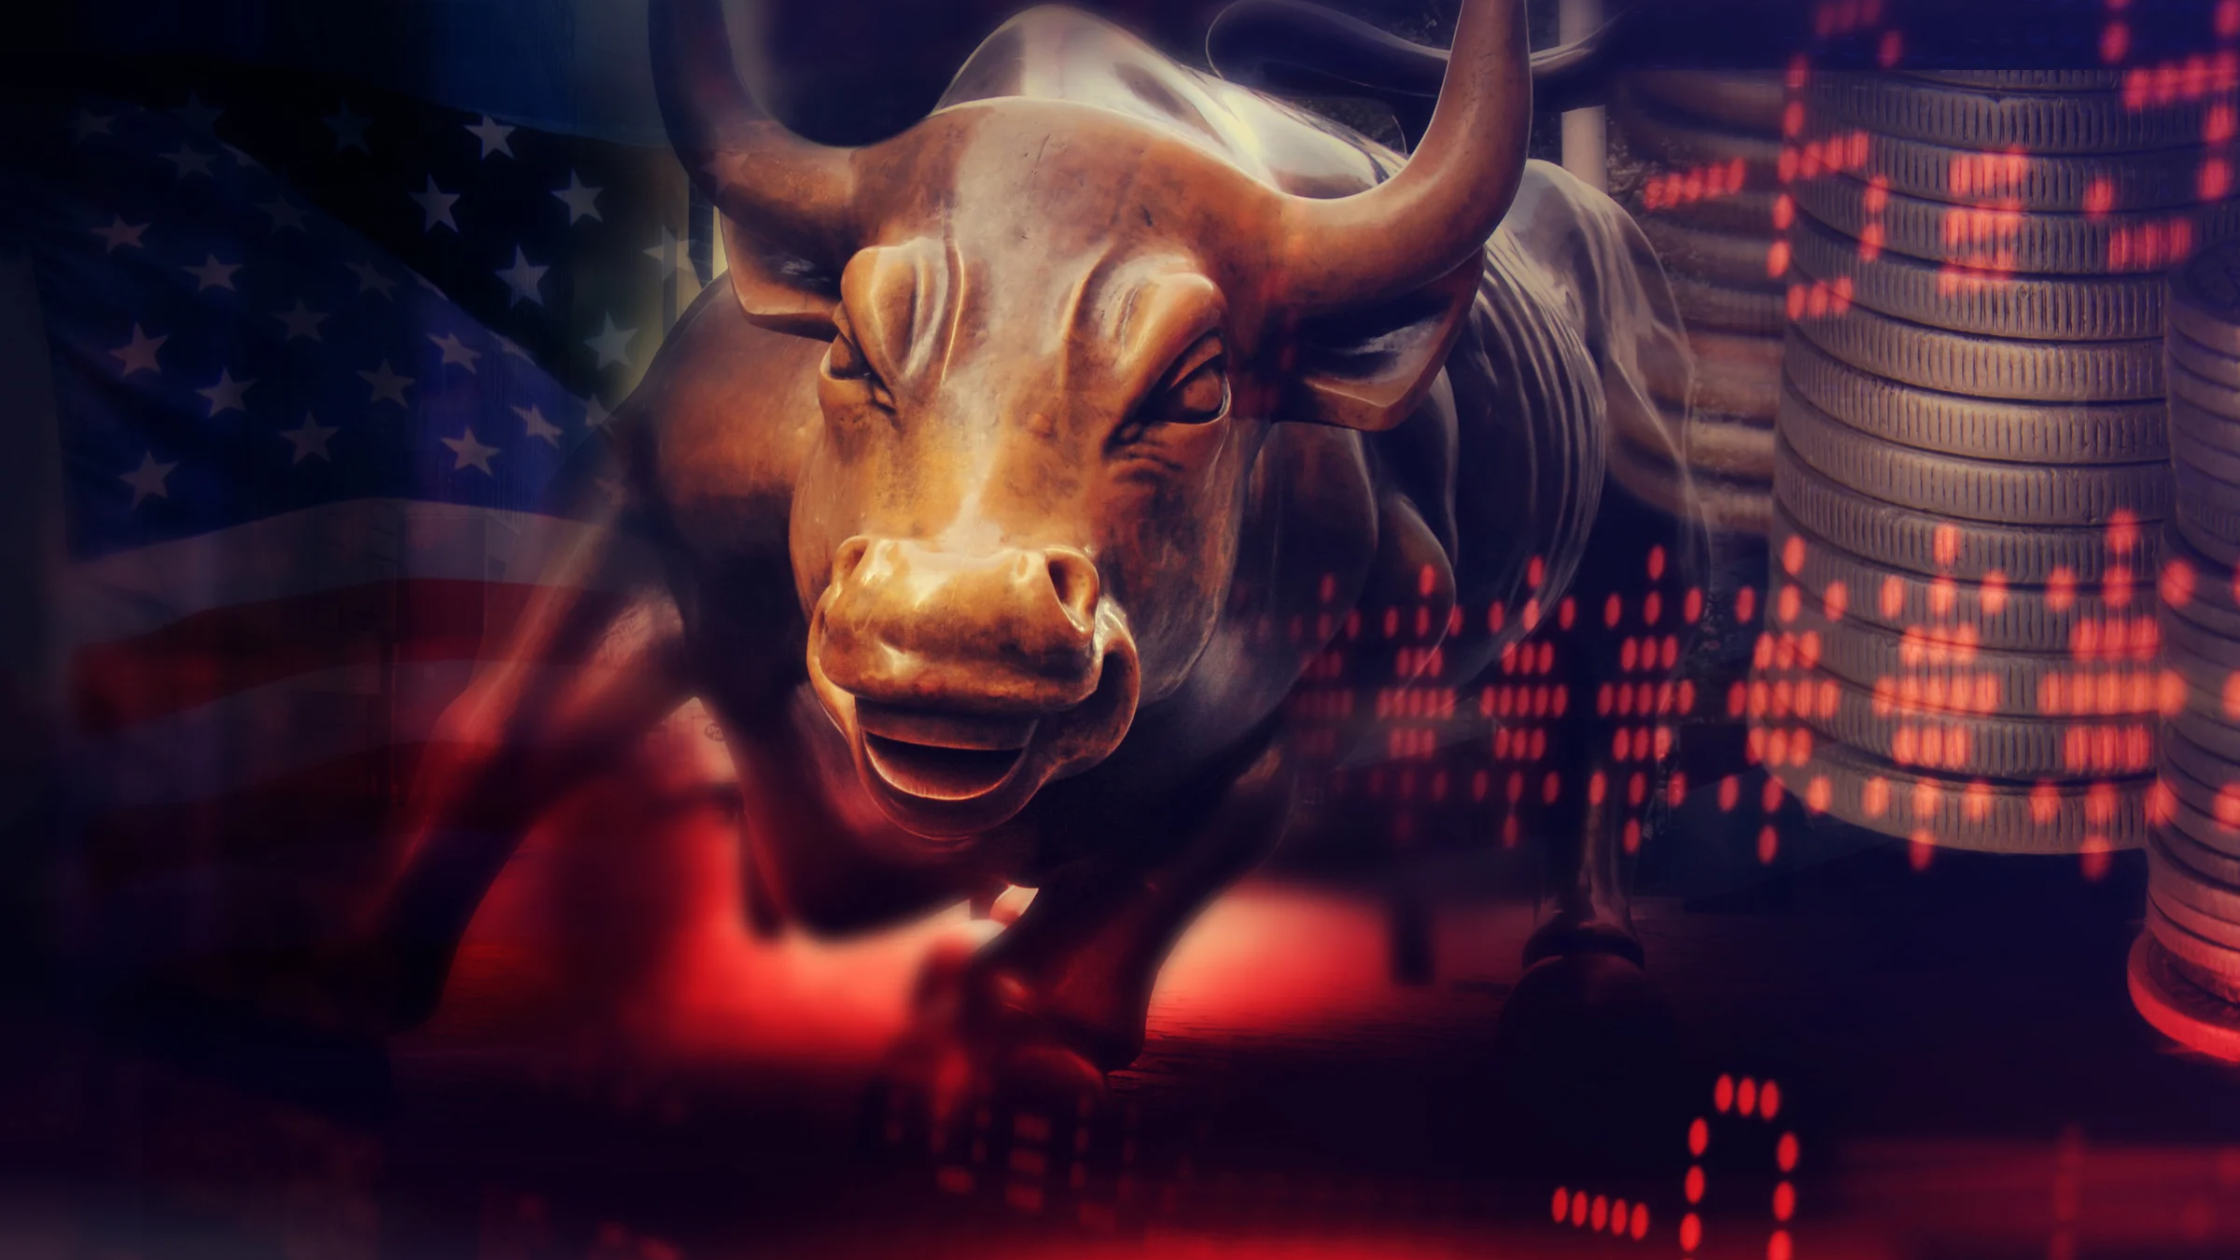 The bull makes its way to the Market fasten your sit belts